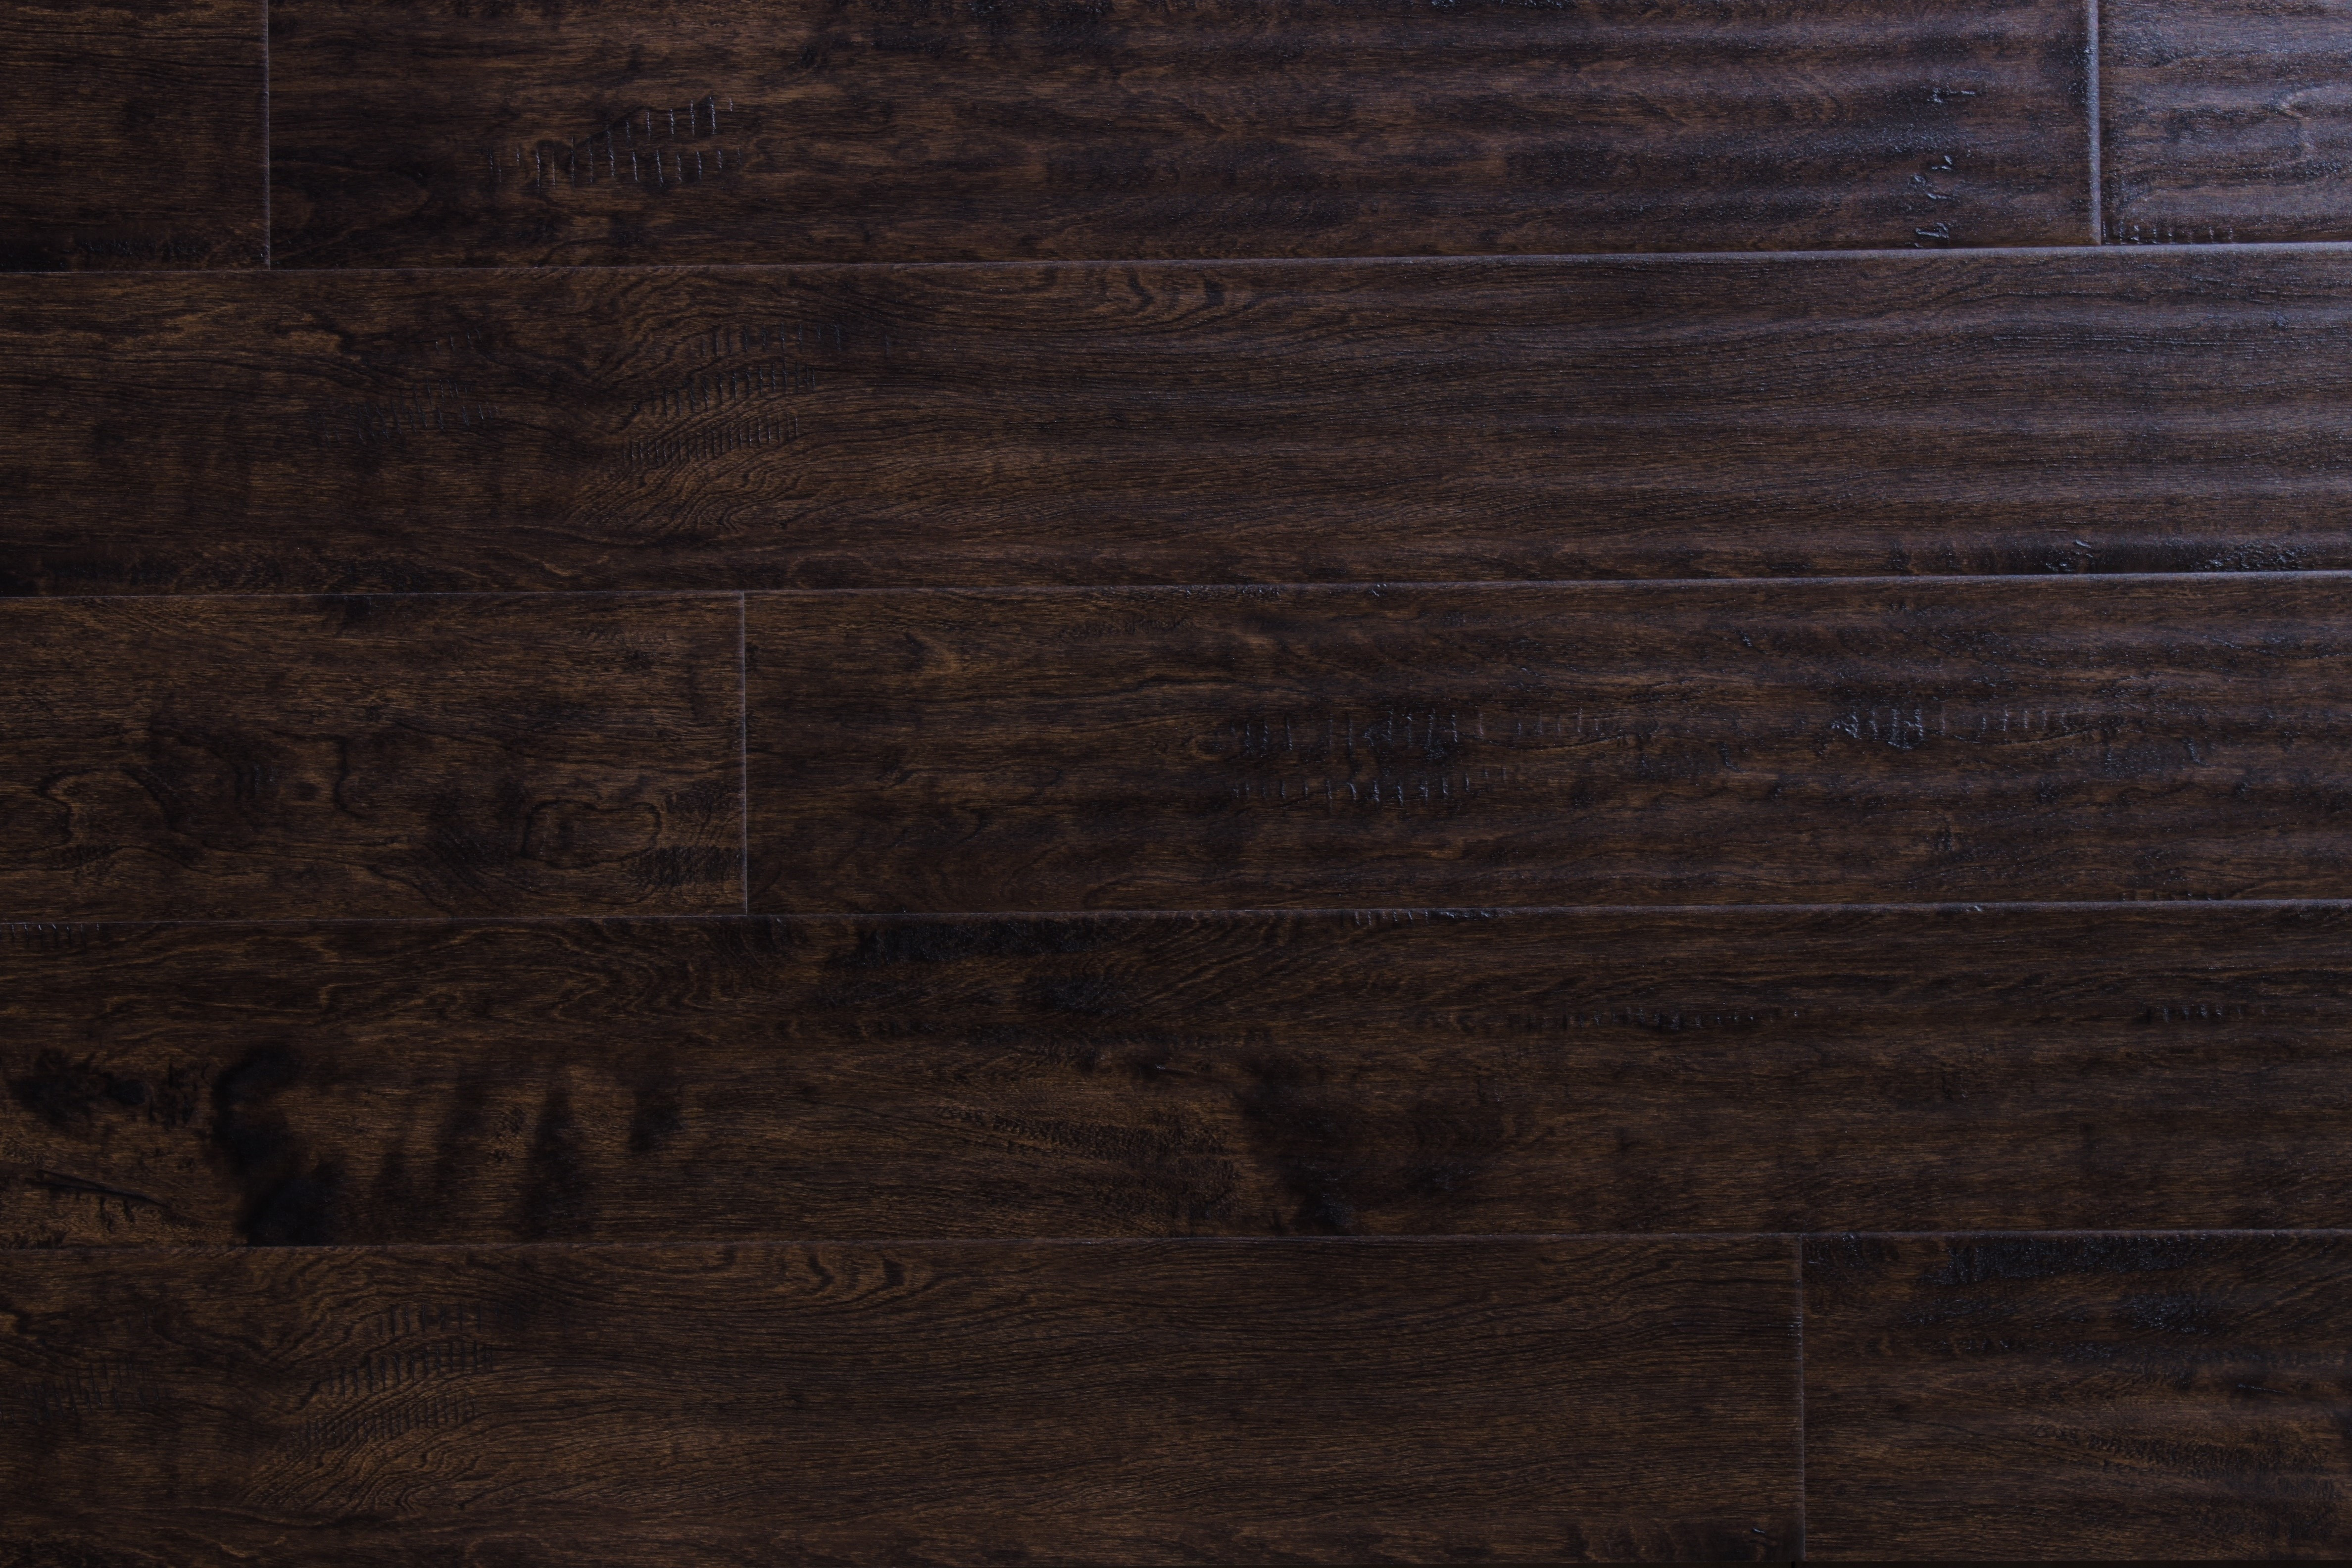 13 Best Hardwood Flooring Lowest Price 2024 free download hardwood flooring lowest price of wood flooring free samples available at builddirecta intended for tailor multi gb 5874277bb8d3c